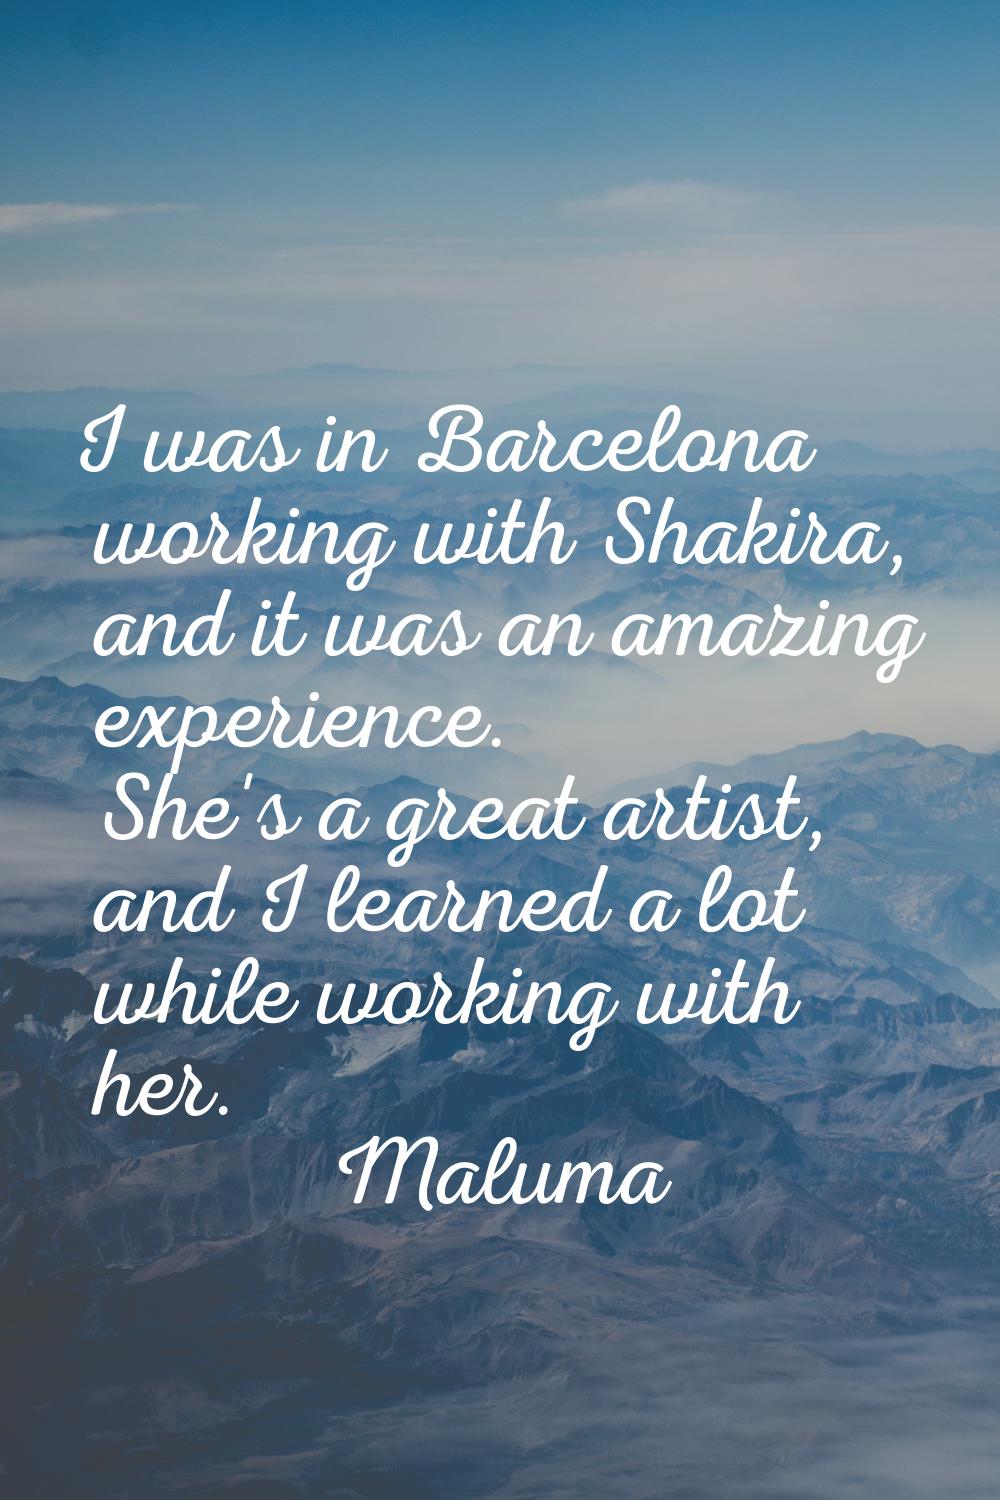 I was in Barcelona working with Shakira, and it was an amazing experience. She's a great artist, an